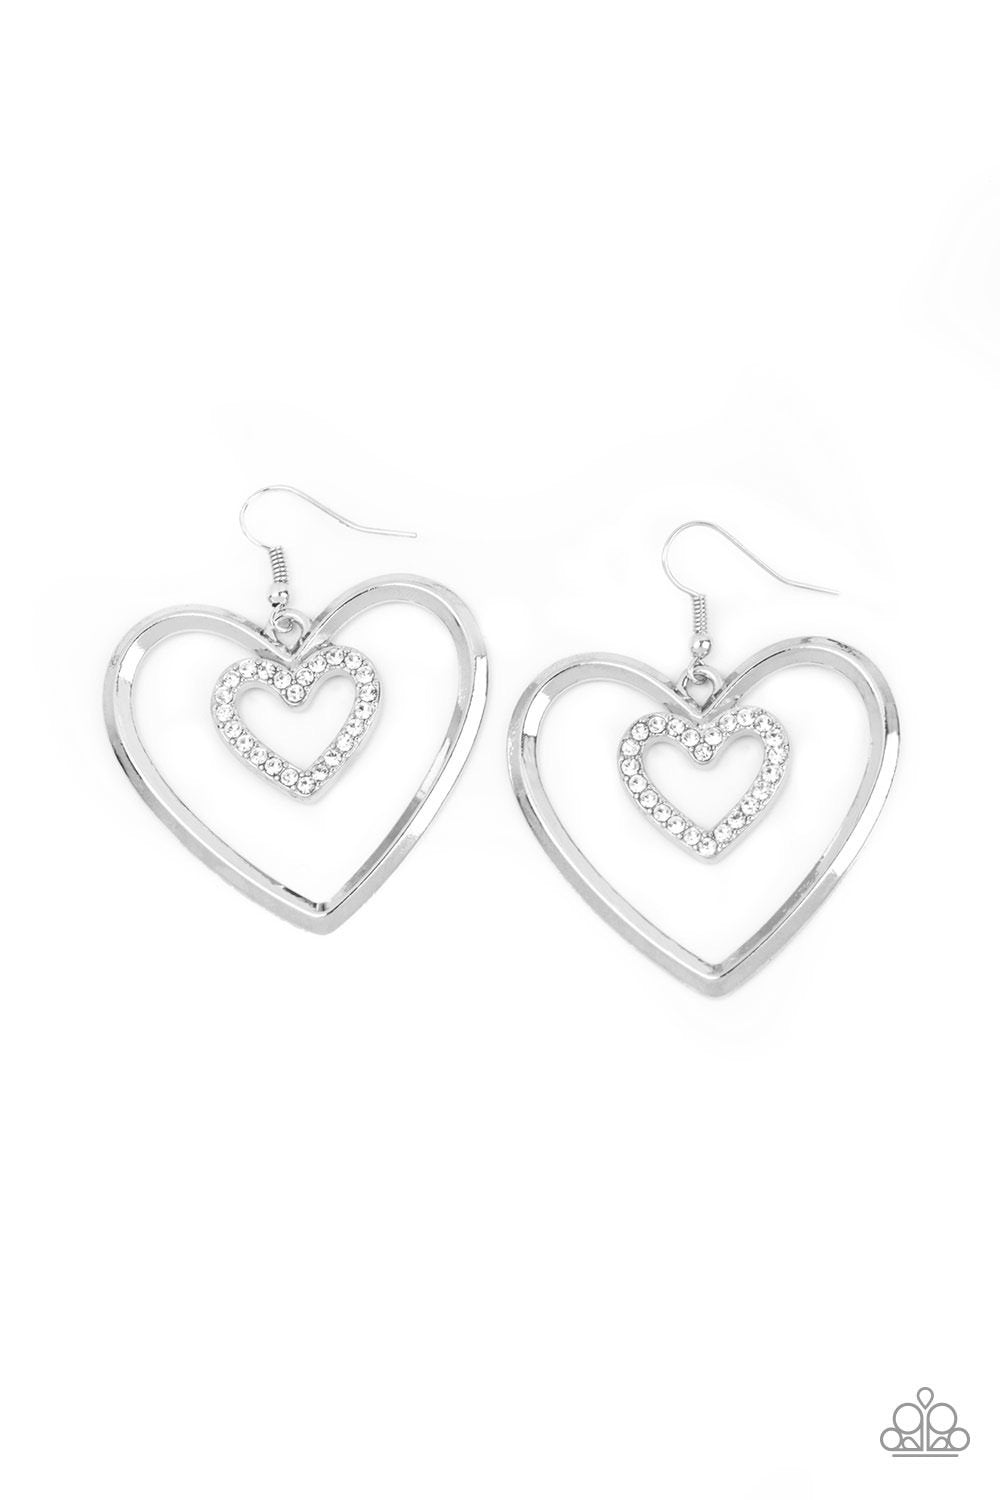 Heart Candy Couture - Paparazzi - White Earrings